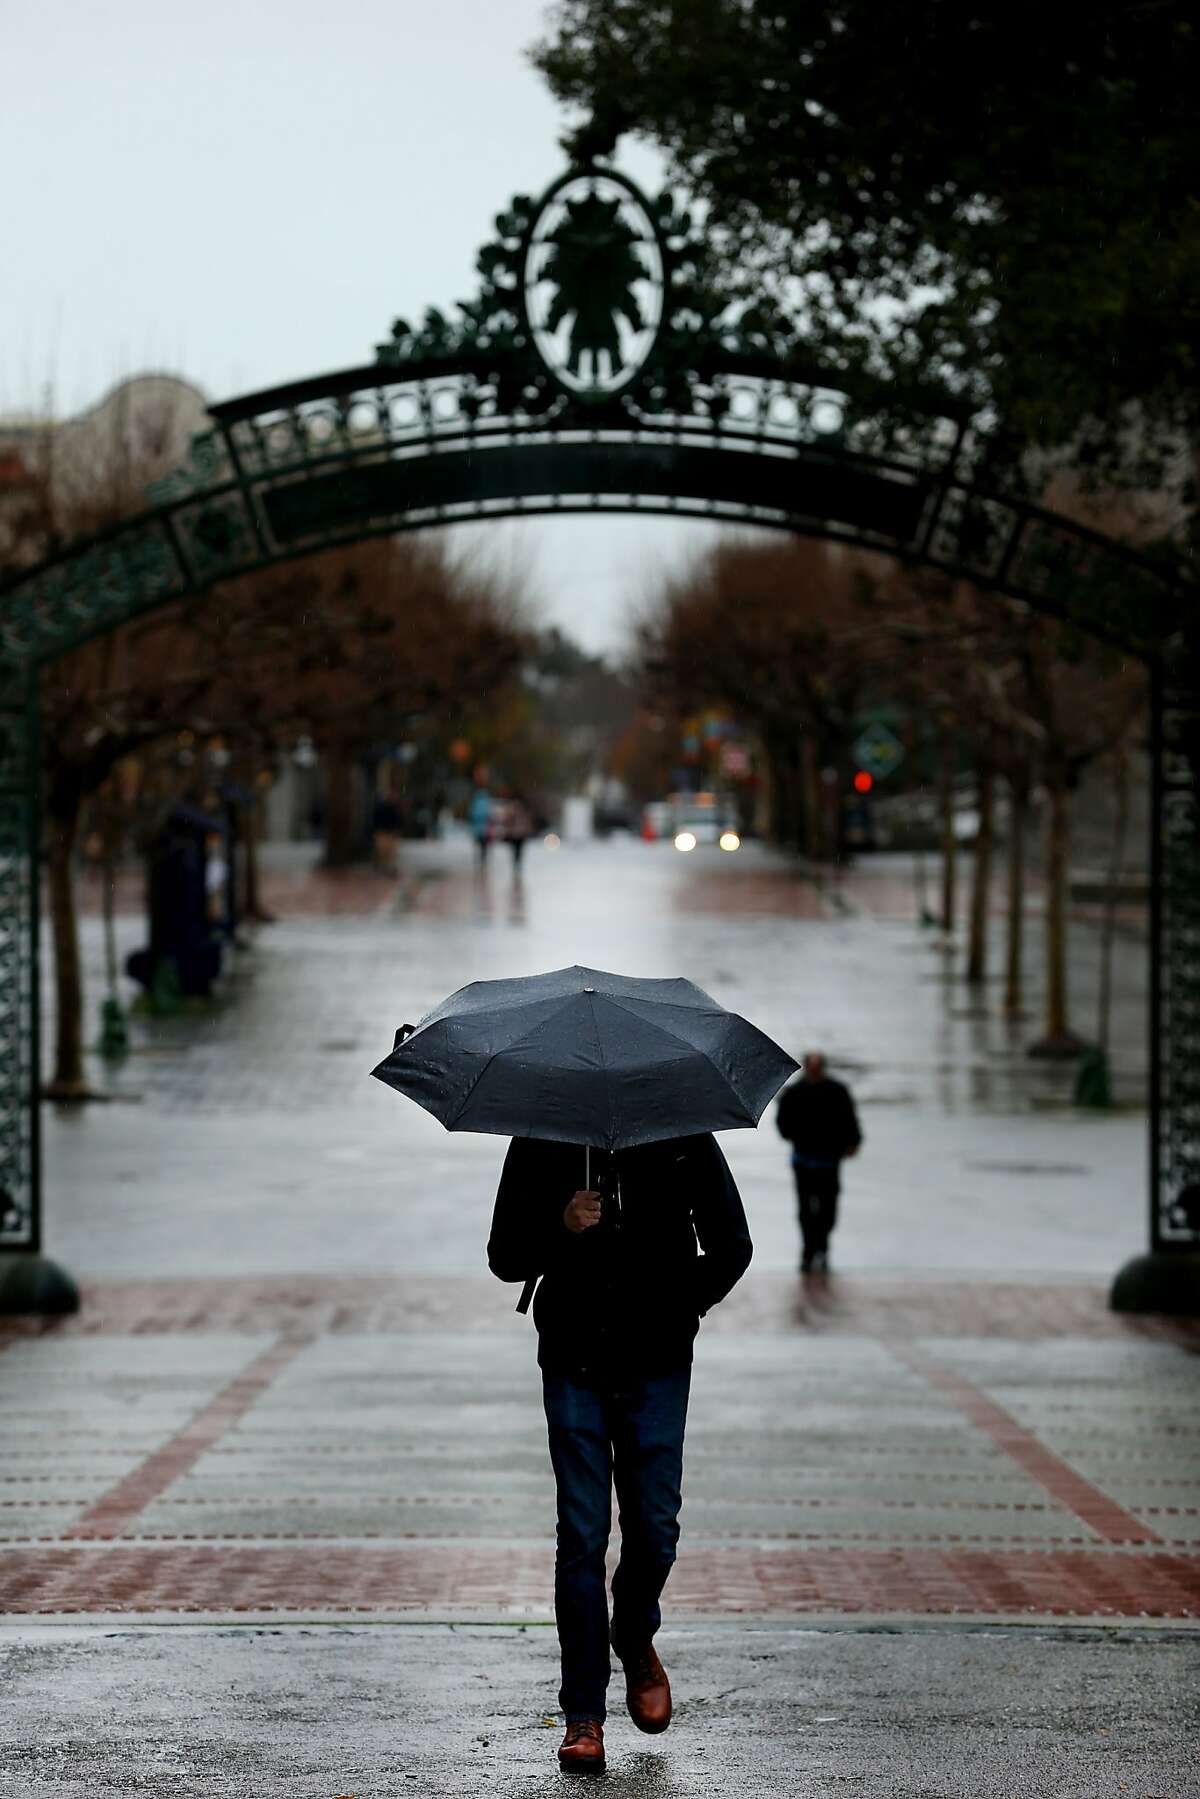 Dallin Jackson, a UC Berkeley student in his senior year, make his way past Sather Gate during a rainy day at UC Berkeley on Wednesday, Jan. 4, 2017 in Berkeley, Calif. Tuition at the University of California is expected to grow for the first time since 2011 under a proposal the UC regents will consider this month.